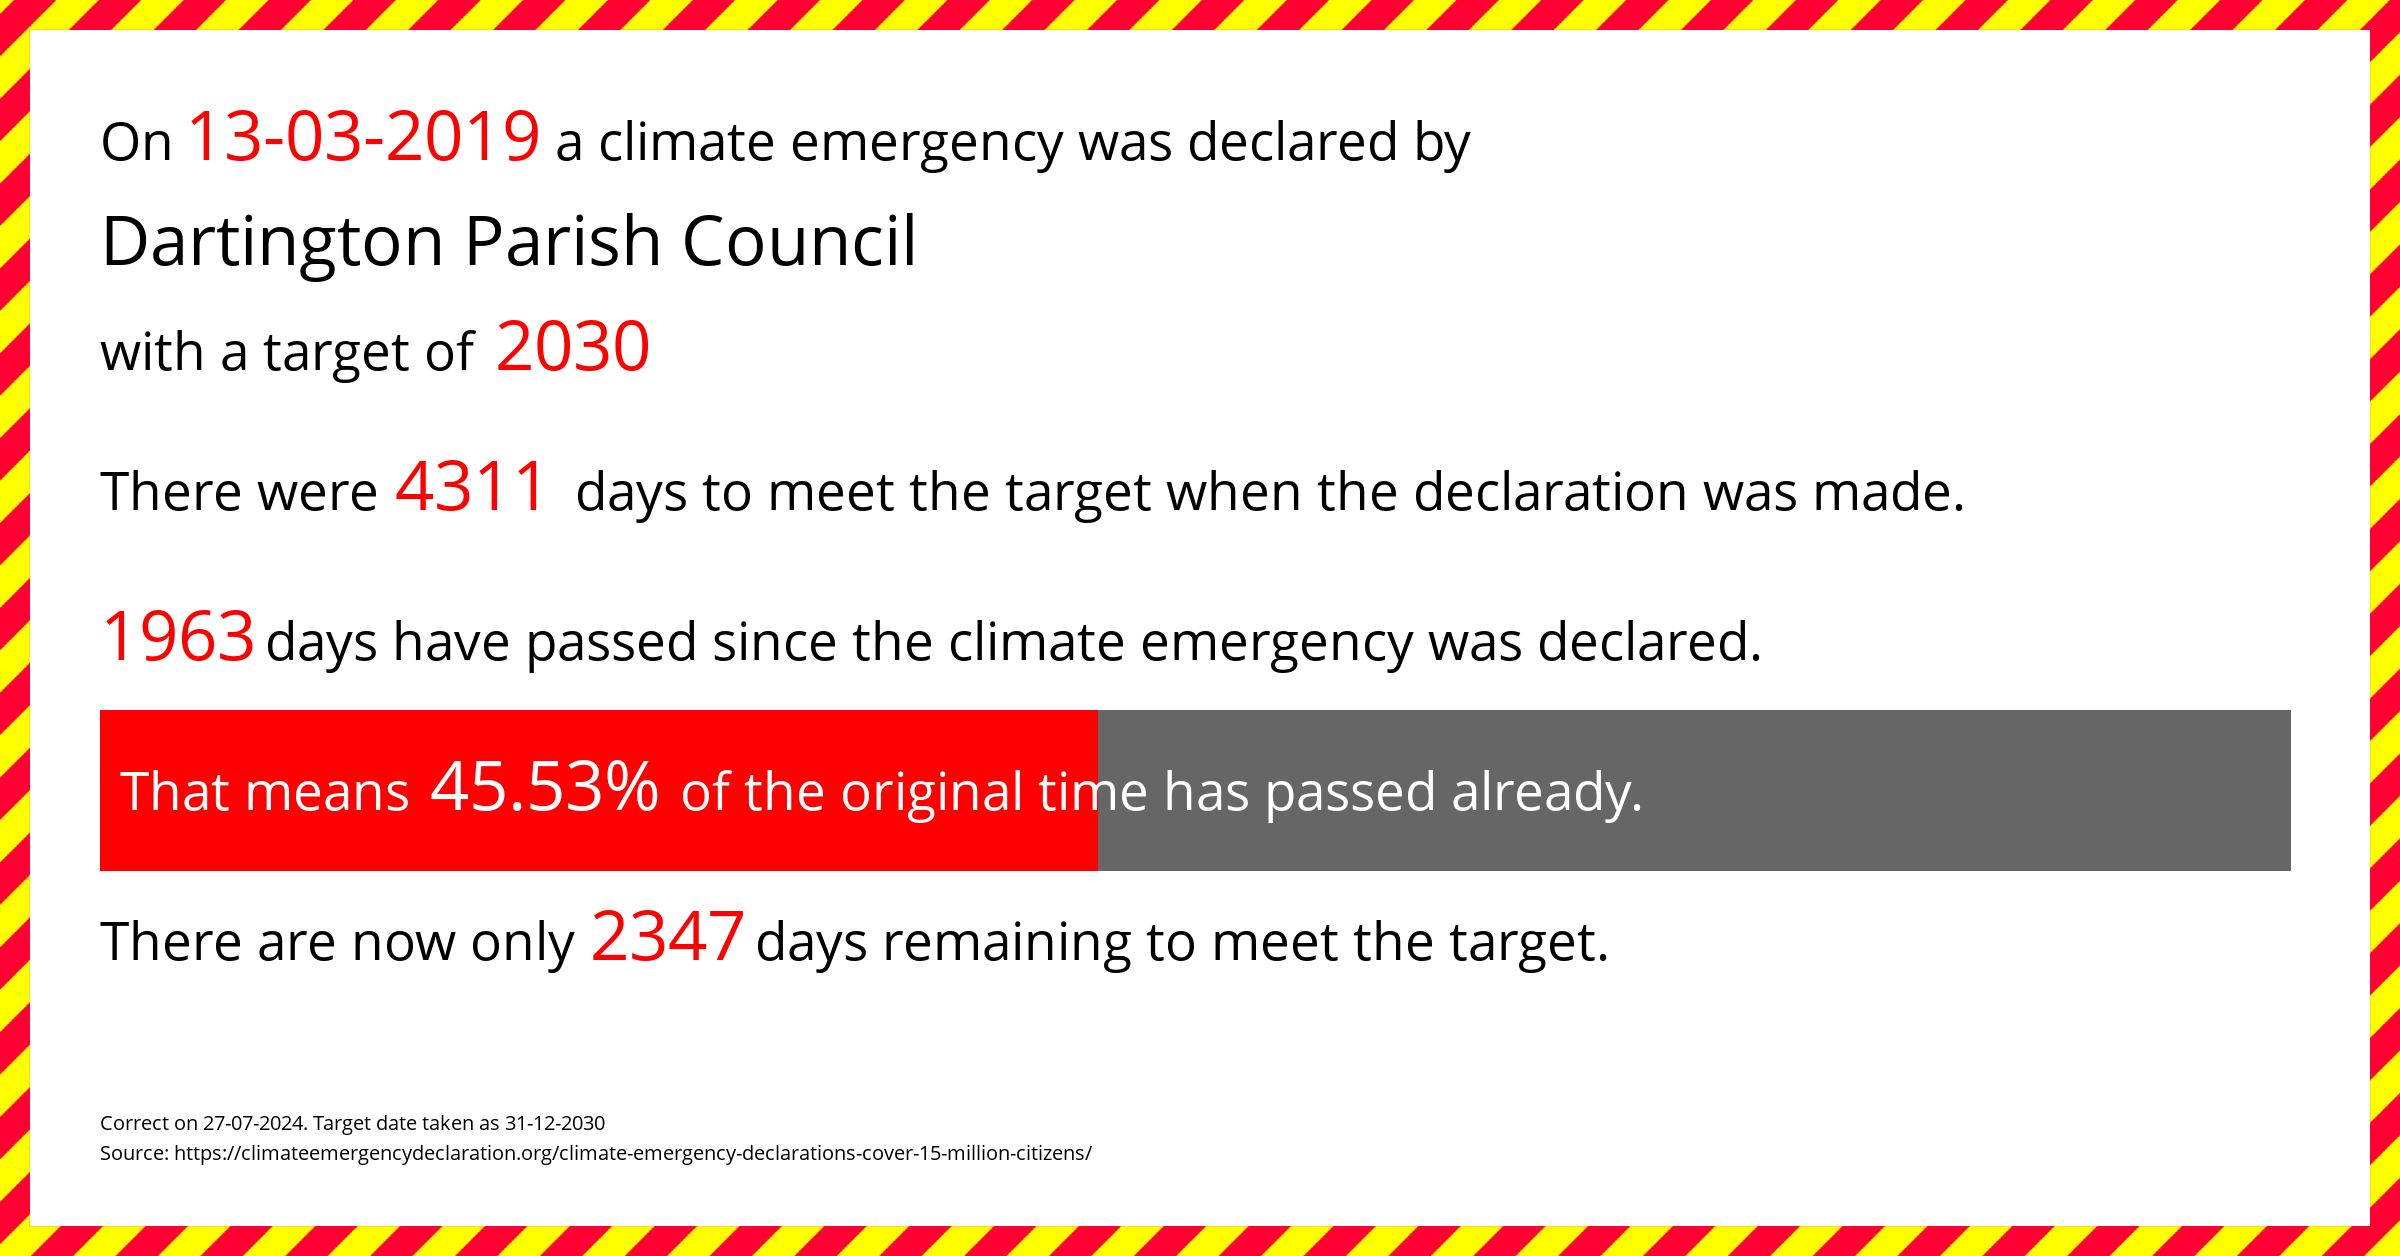 Dartington Parish Council declared a Climate emergency on Wednesday 13th March 2019, with a target of 2030.